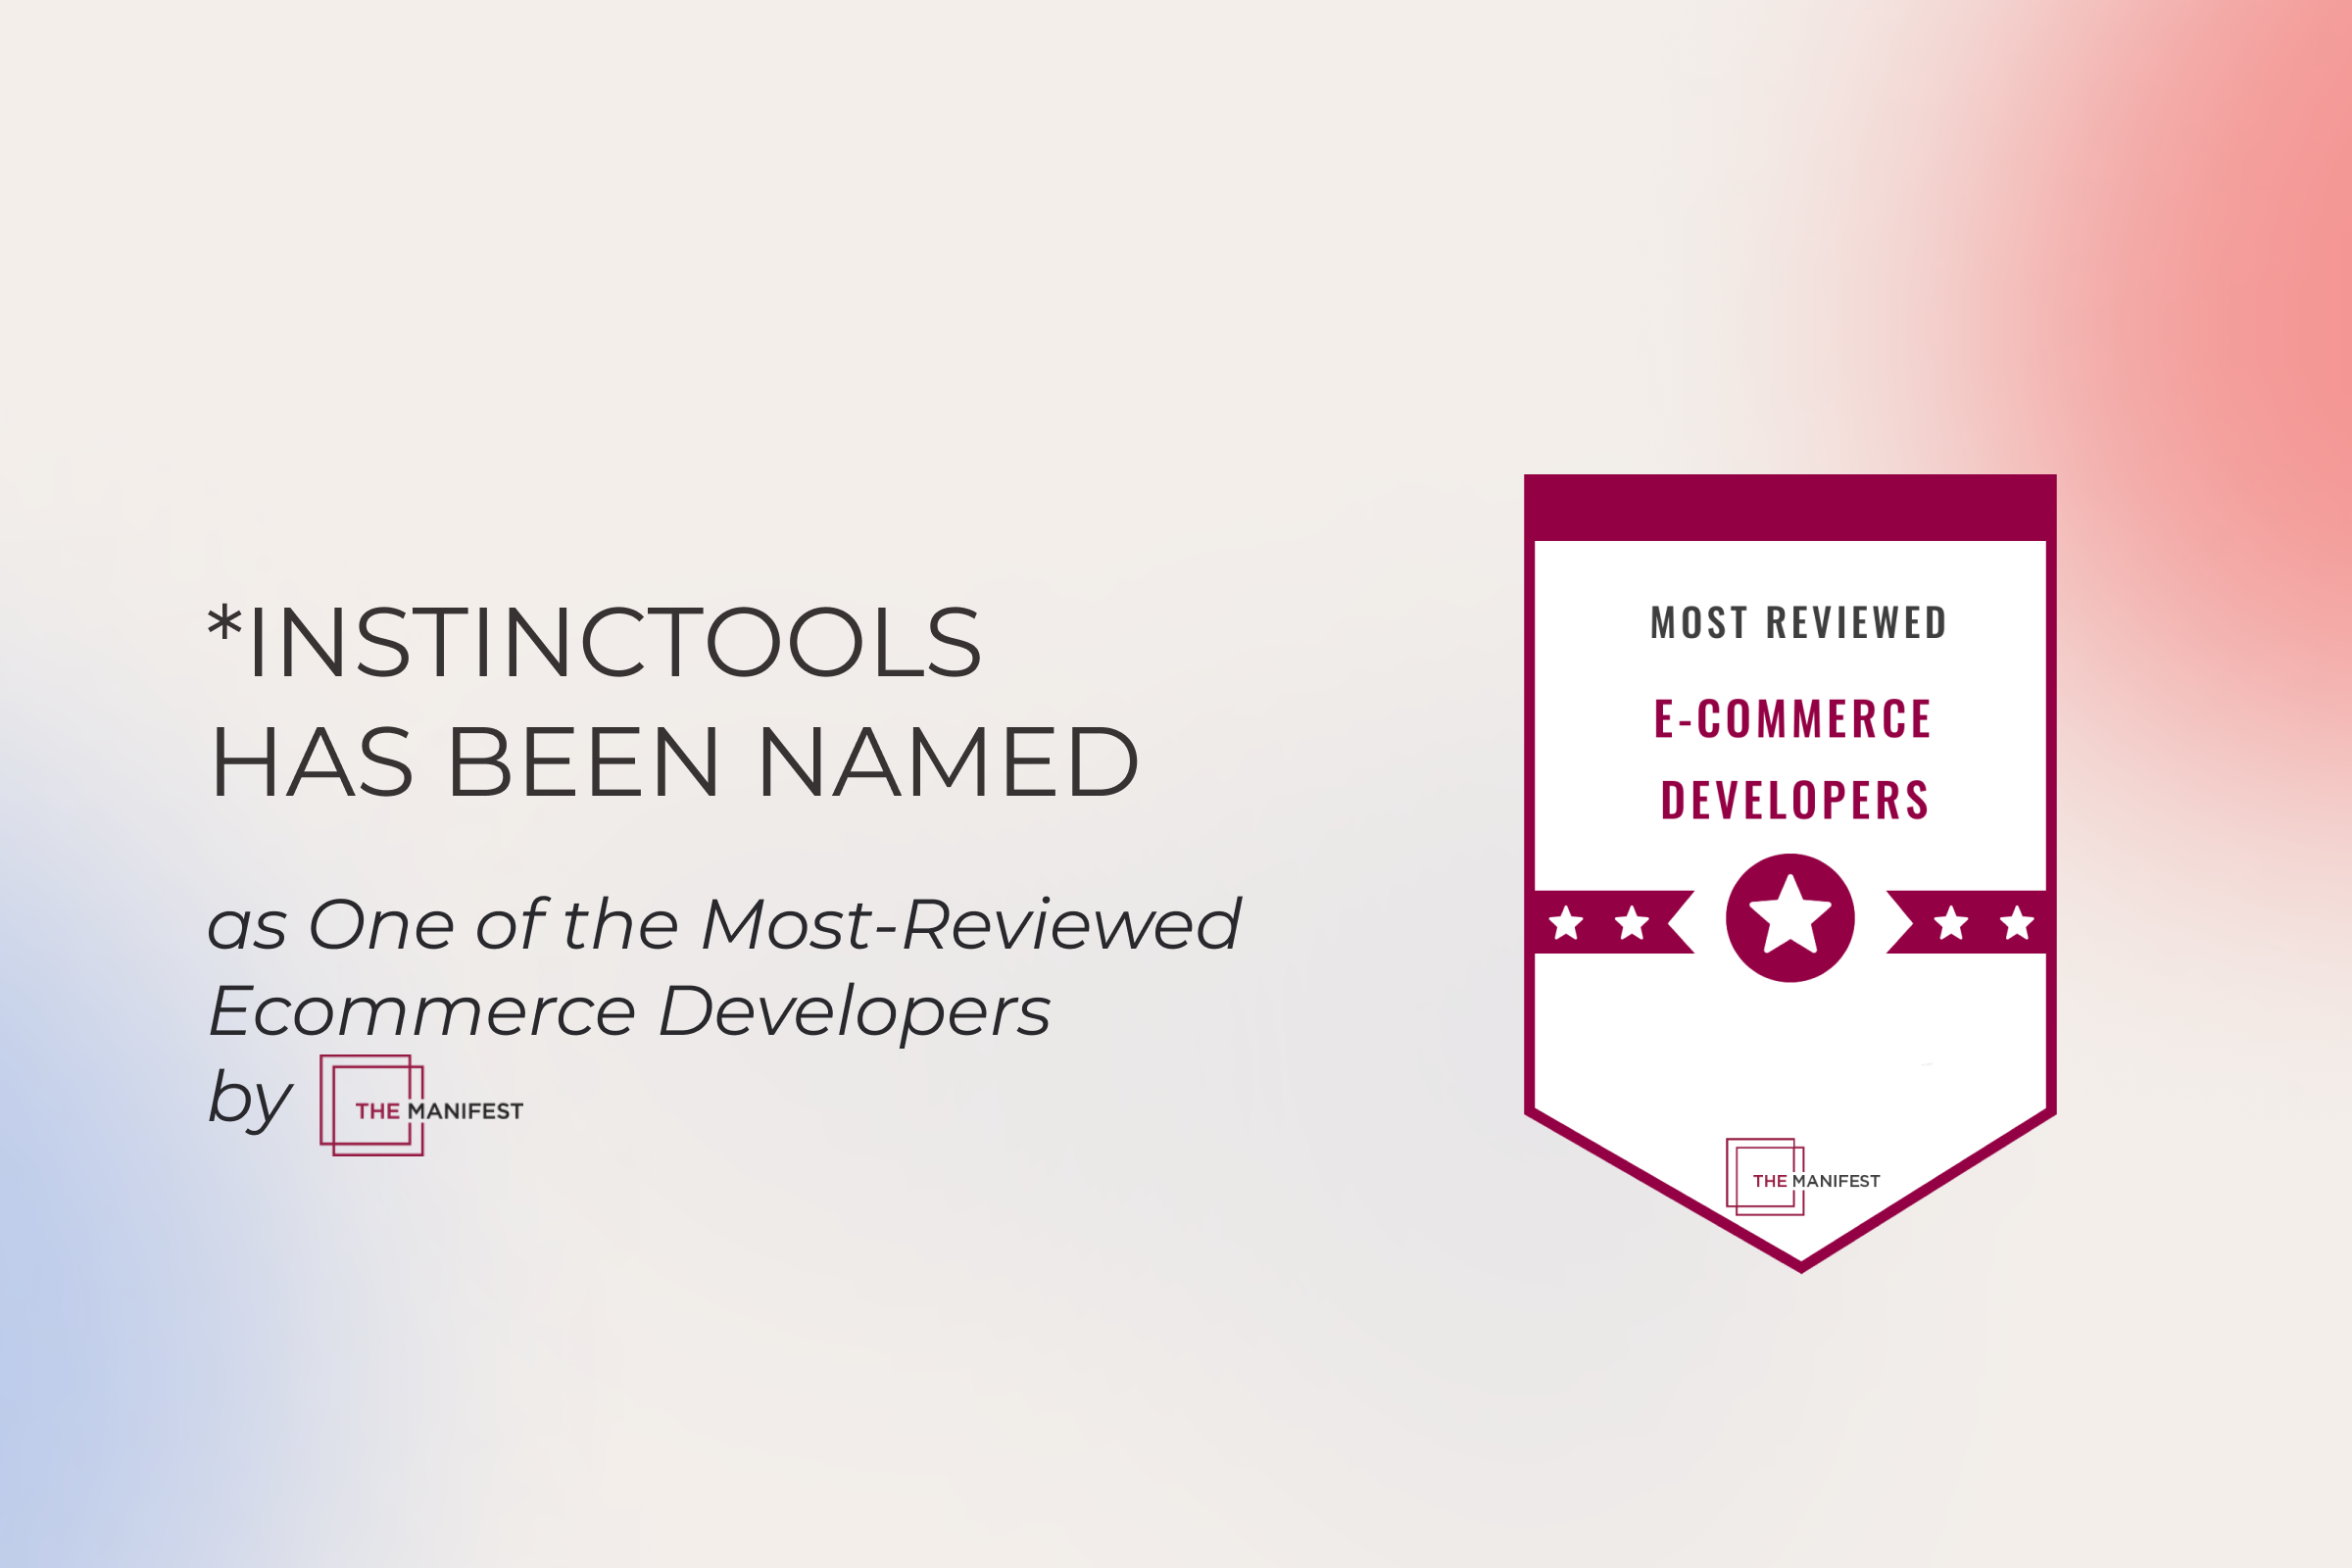 Instinctools Is Named One of the Most-Reviewed Ecommerce Developers